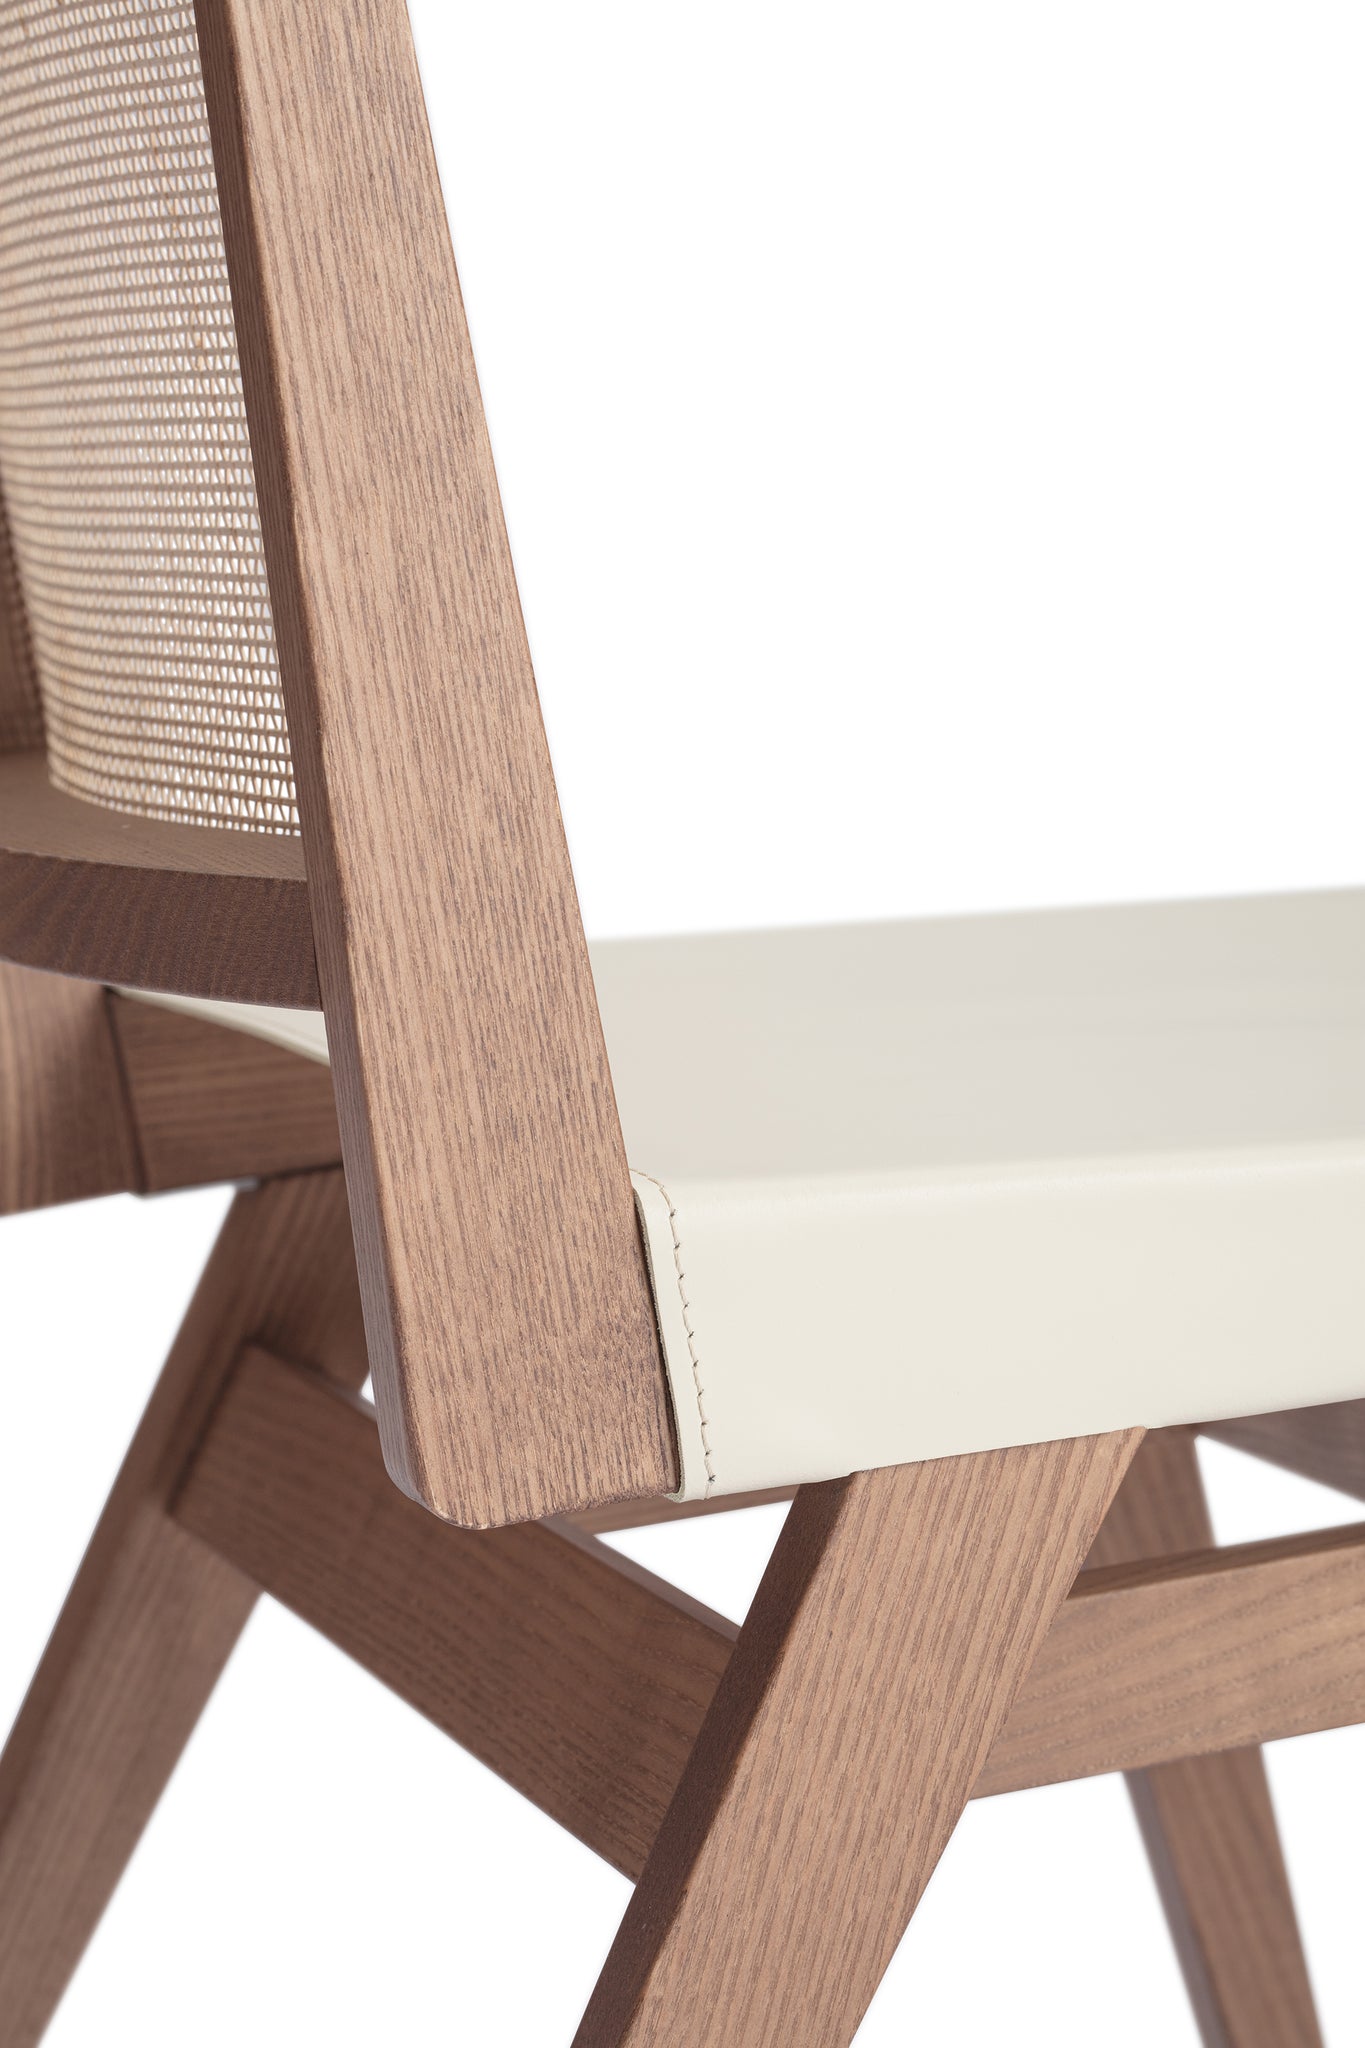 Close-up 1 of an "Elye" modern dining chair, walnut stained ash frame, square weave cane back, contract grade off white leather seat, produced by Klarel in Italy. #K41-1